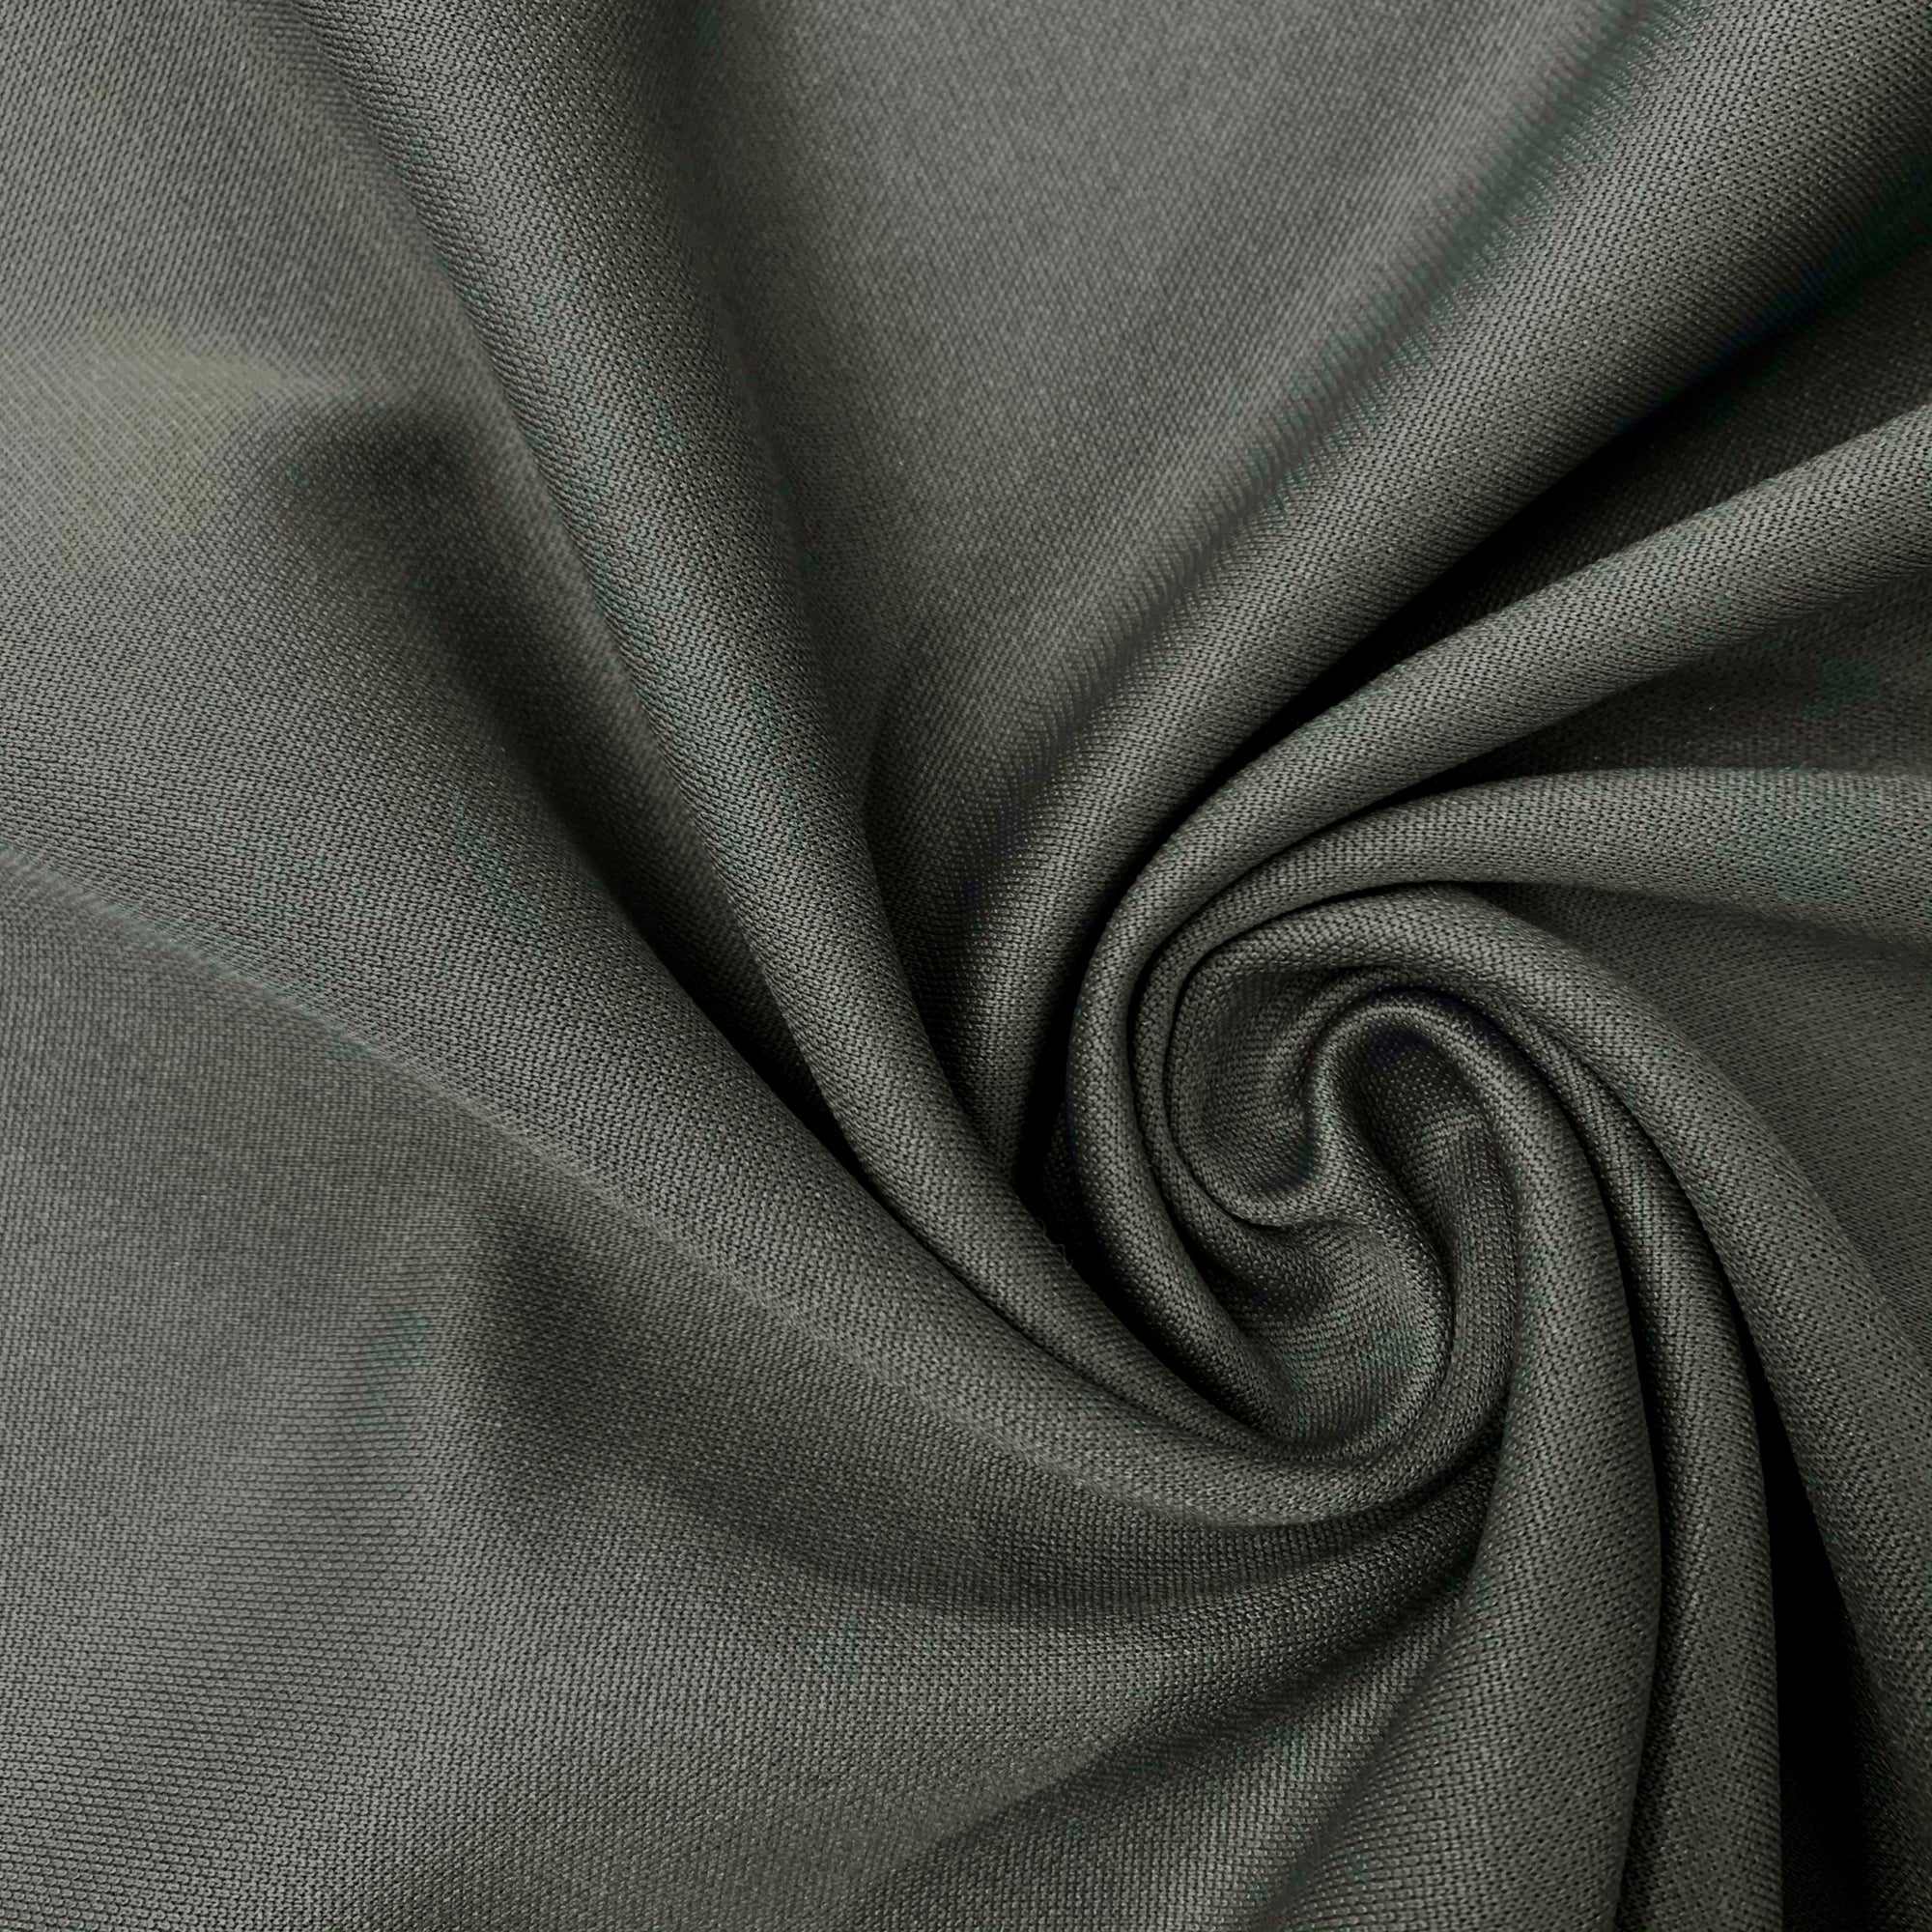 Evie GREY Polyester Scuba Knit Fabric by the Yard